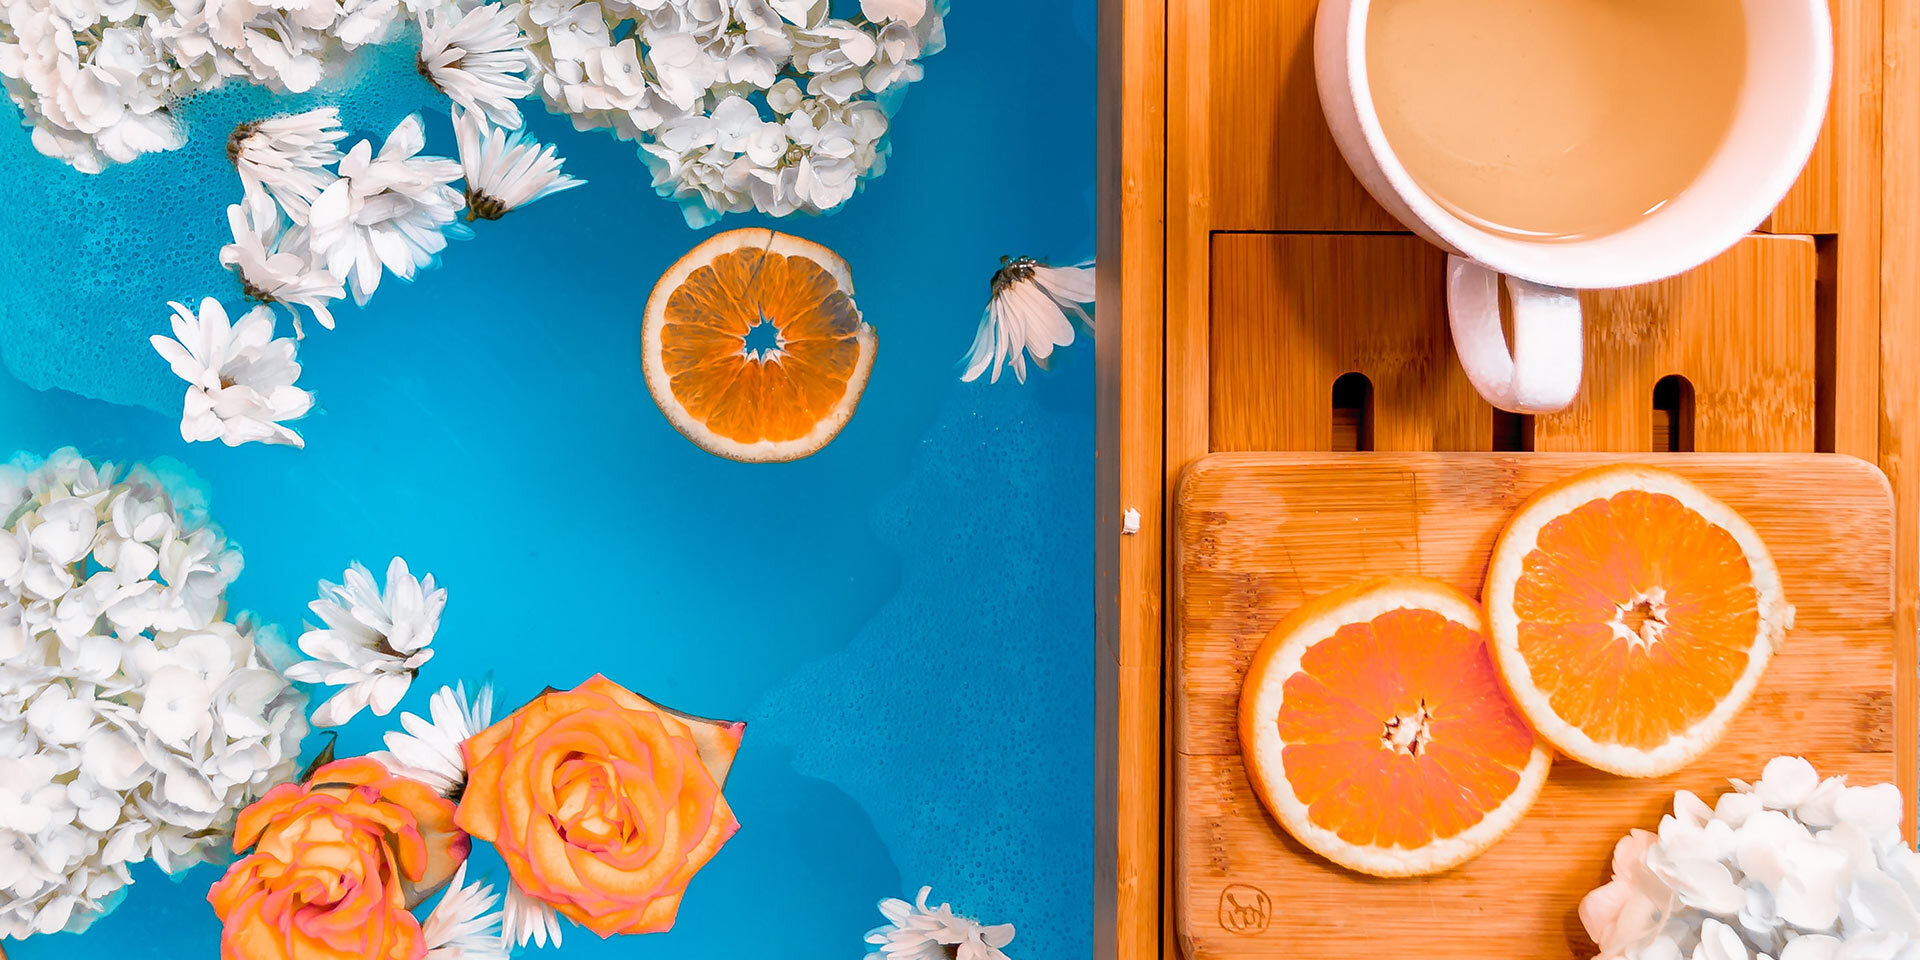 orange slices and flowers in water next to wood with tea cup on it